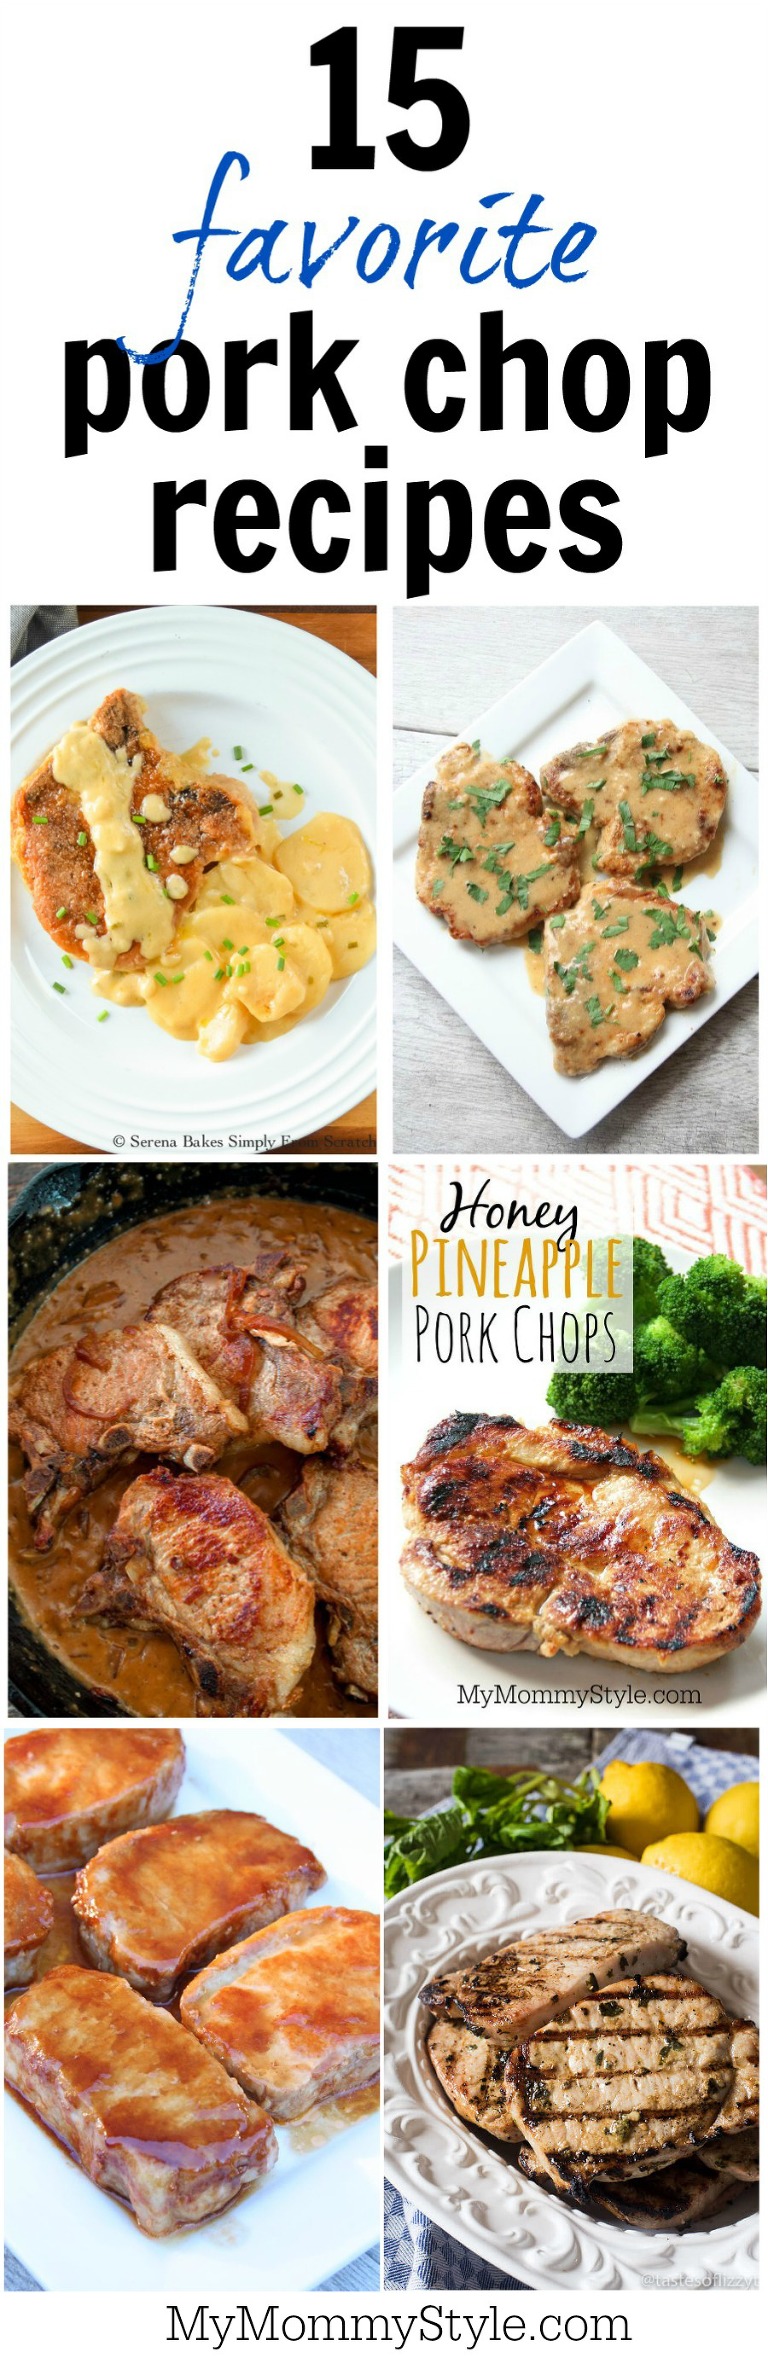 Delicious pork chop recipes that will be family favorite recipes. A little bit of everything, 30 minute pork recipes, grilled pork chops, smothered pork chops, and baked pork chops. 